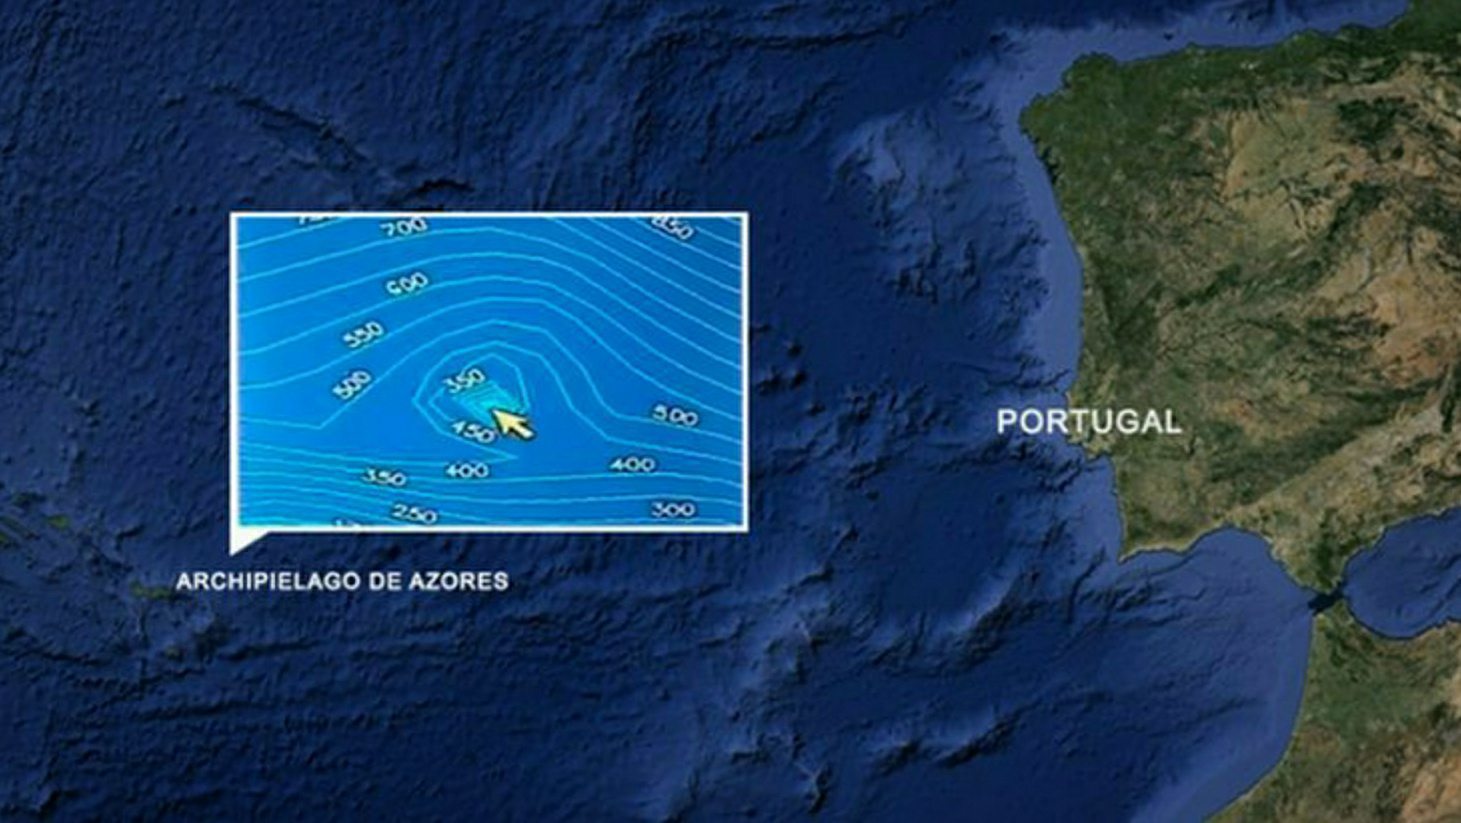 Submerged Pyramid Discovered Near Azores, Portugal